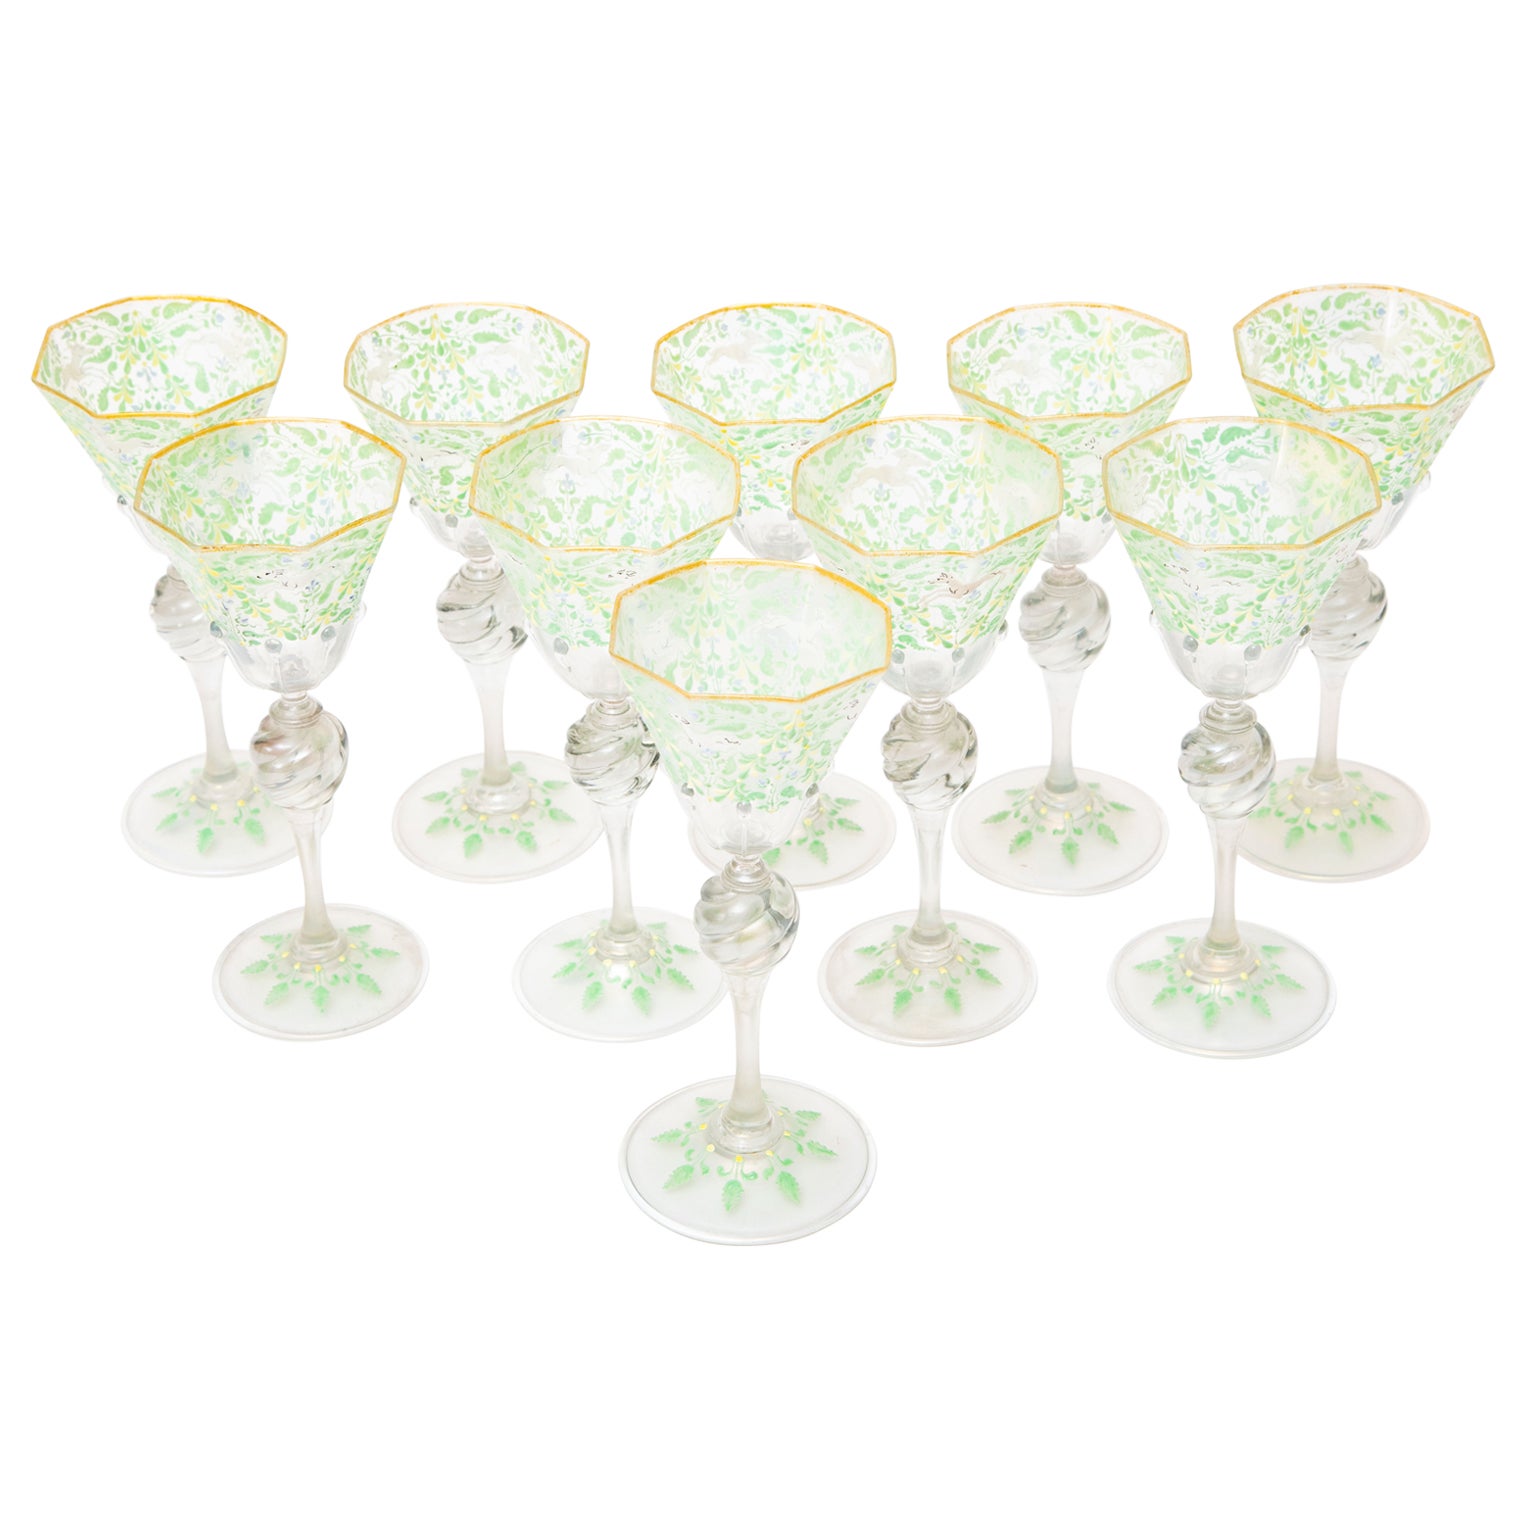 10 Antique Venetian Goblets, Hand Enameled circa 1890 with Knob Stems